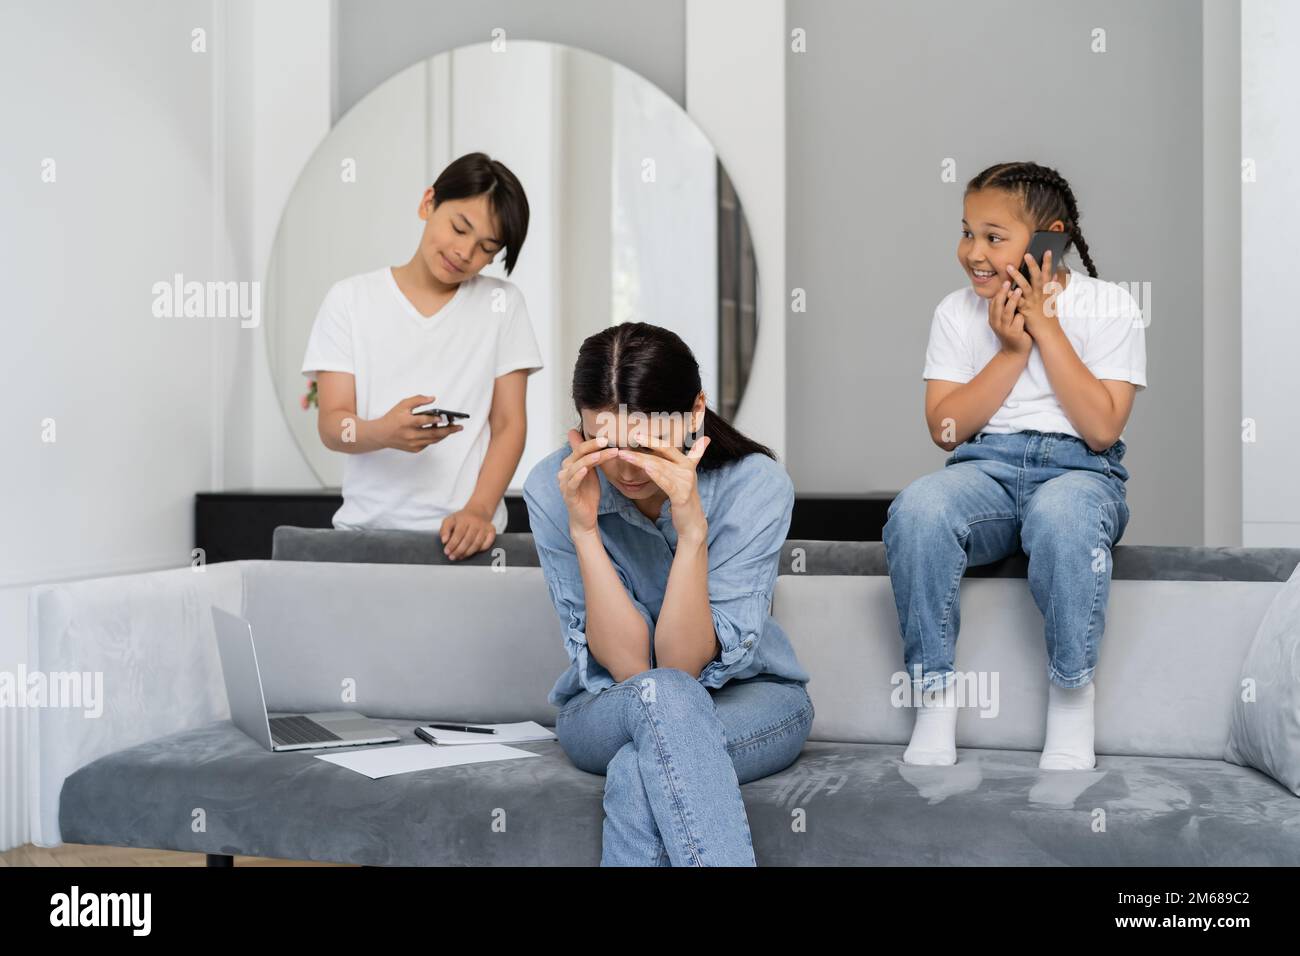 Tired mother sitting near laptop and asian kids using smartphones at home,stock image Stock Photo